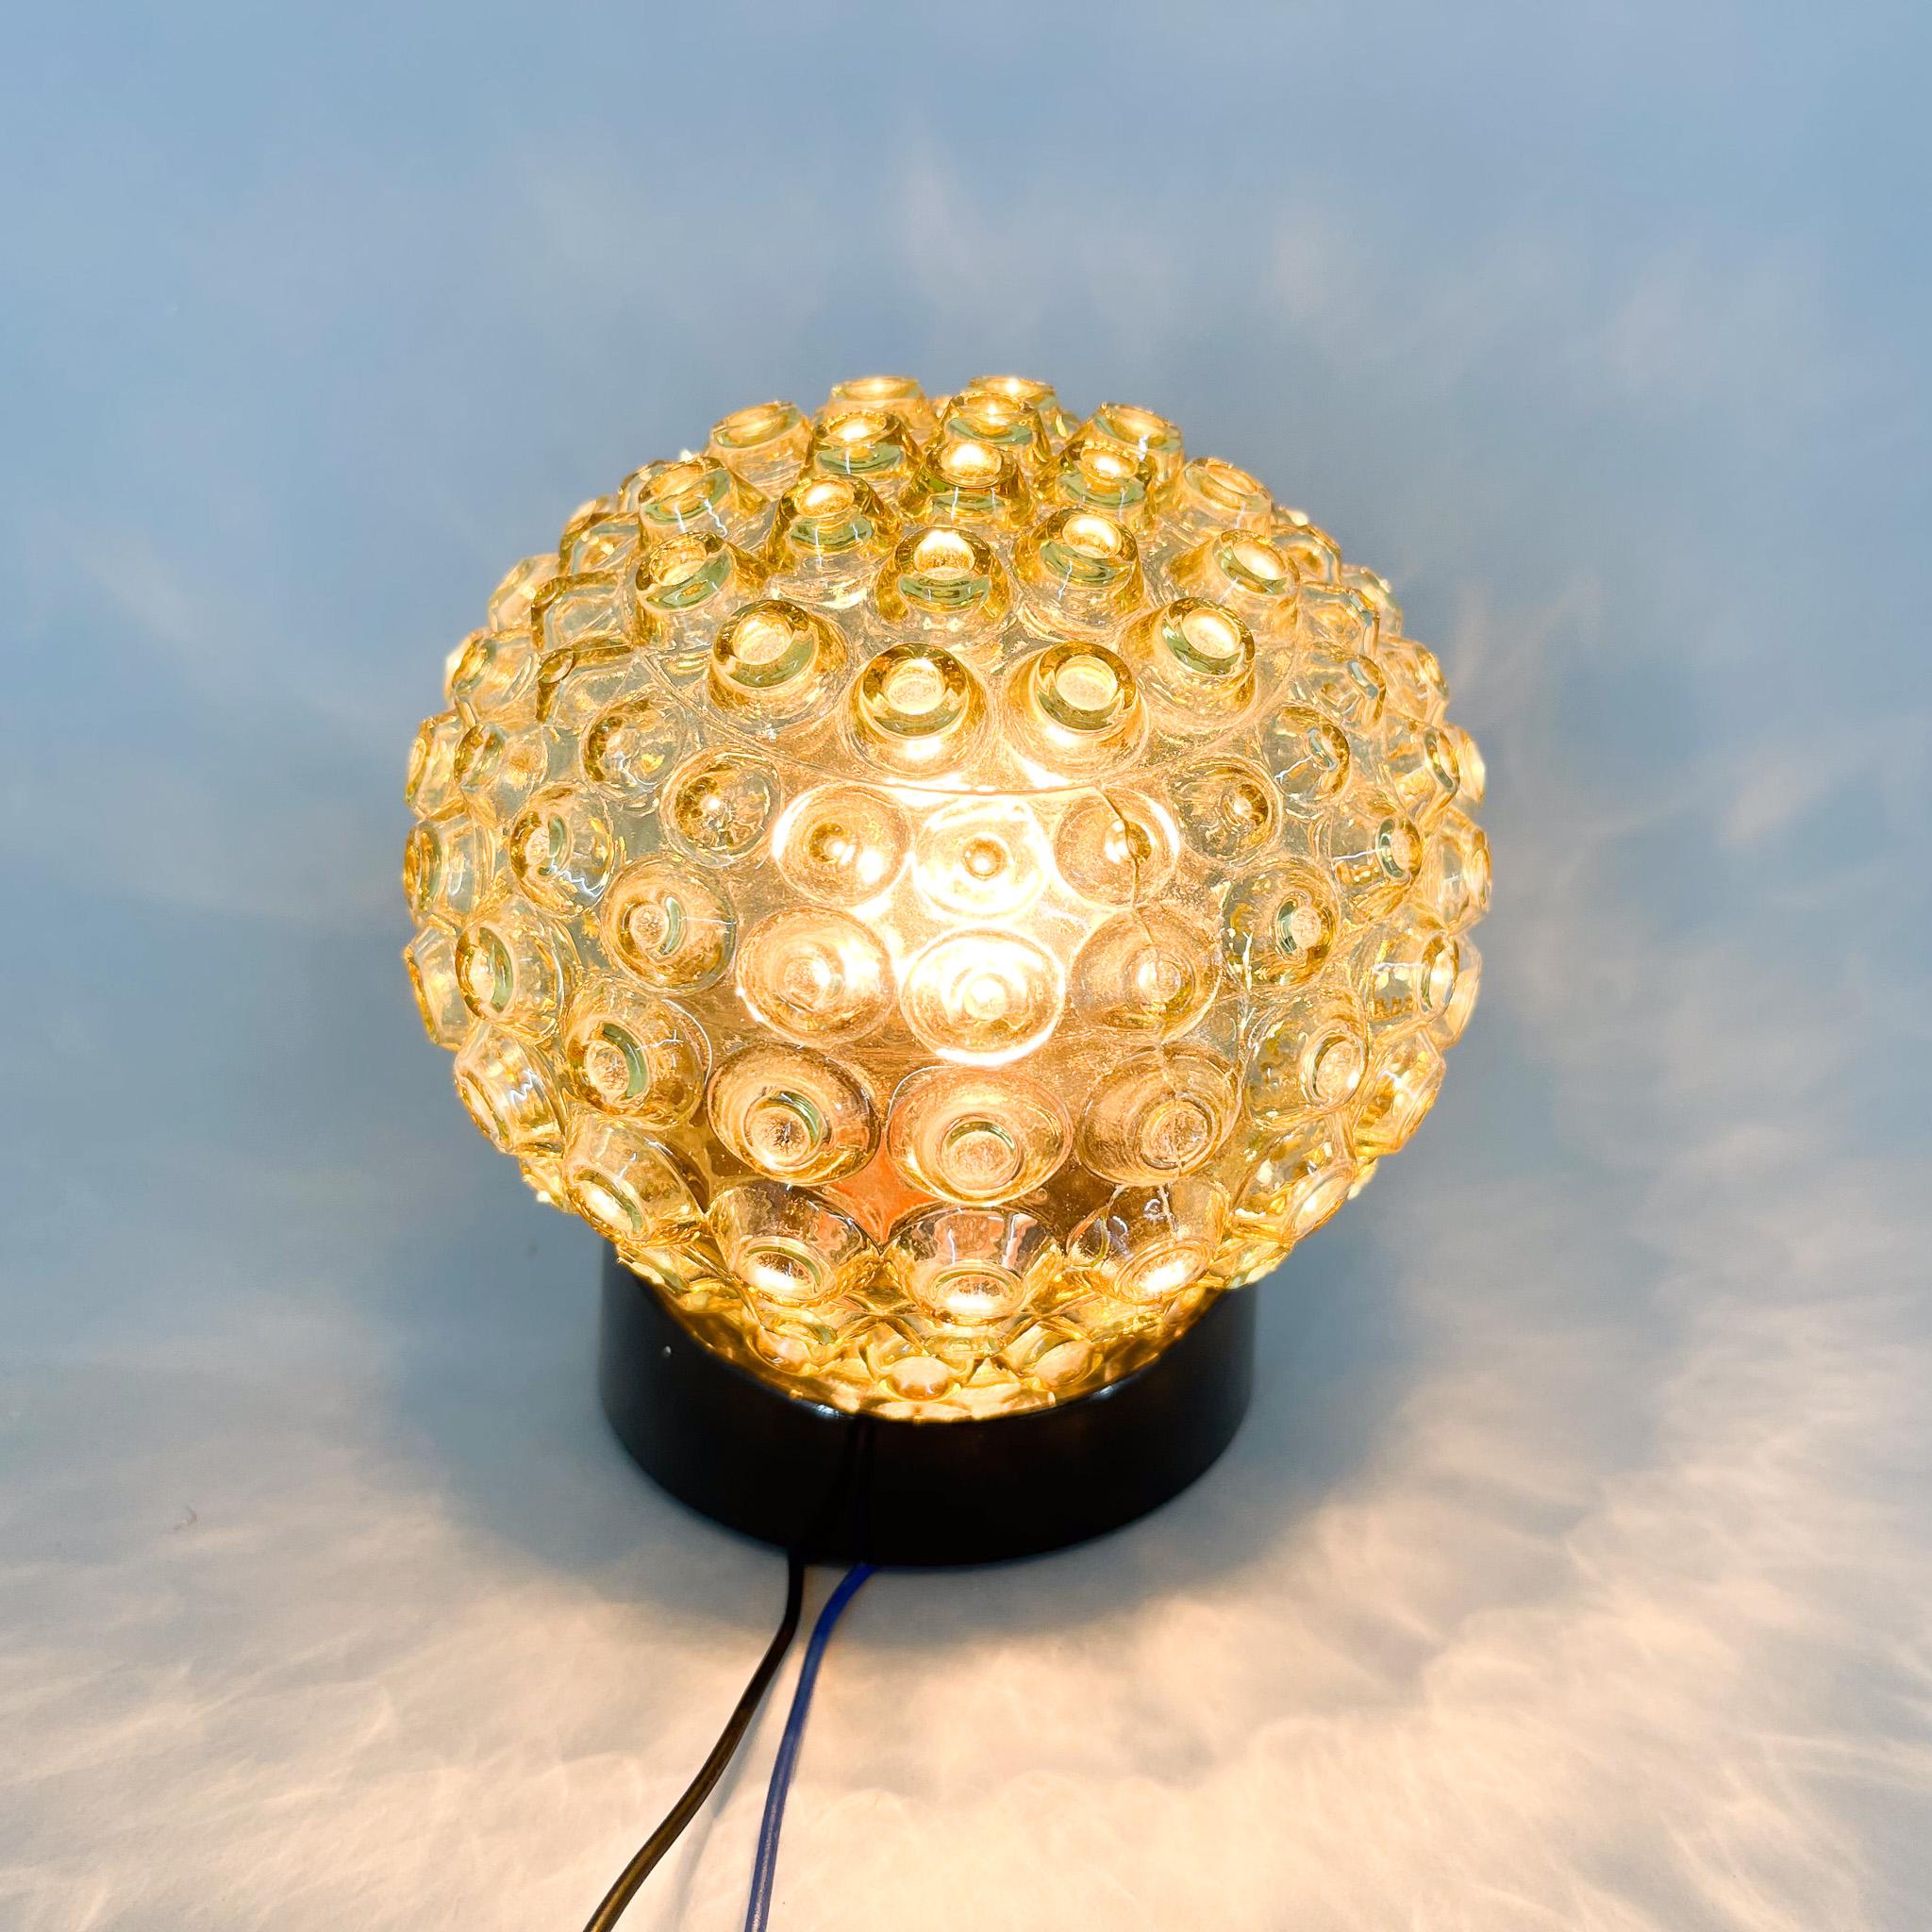 20th Century Midcentury Bakelite & Glass Wall Lamp, 1950s / 4 Items Available For Sale